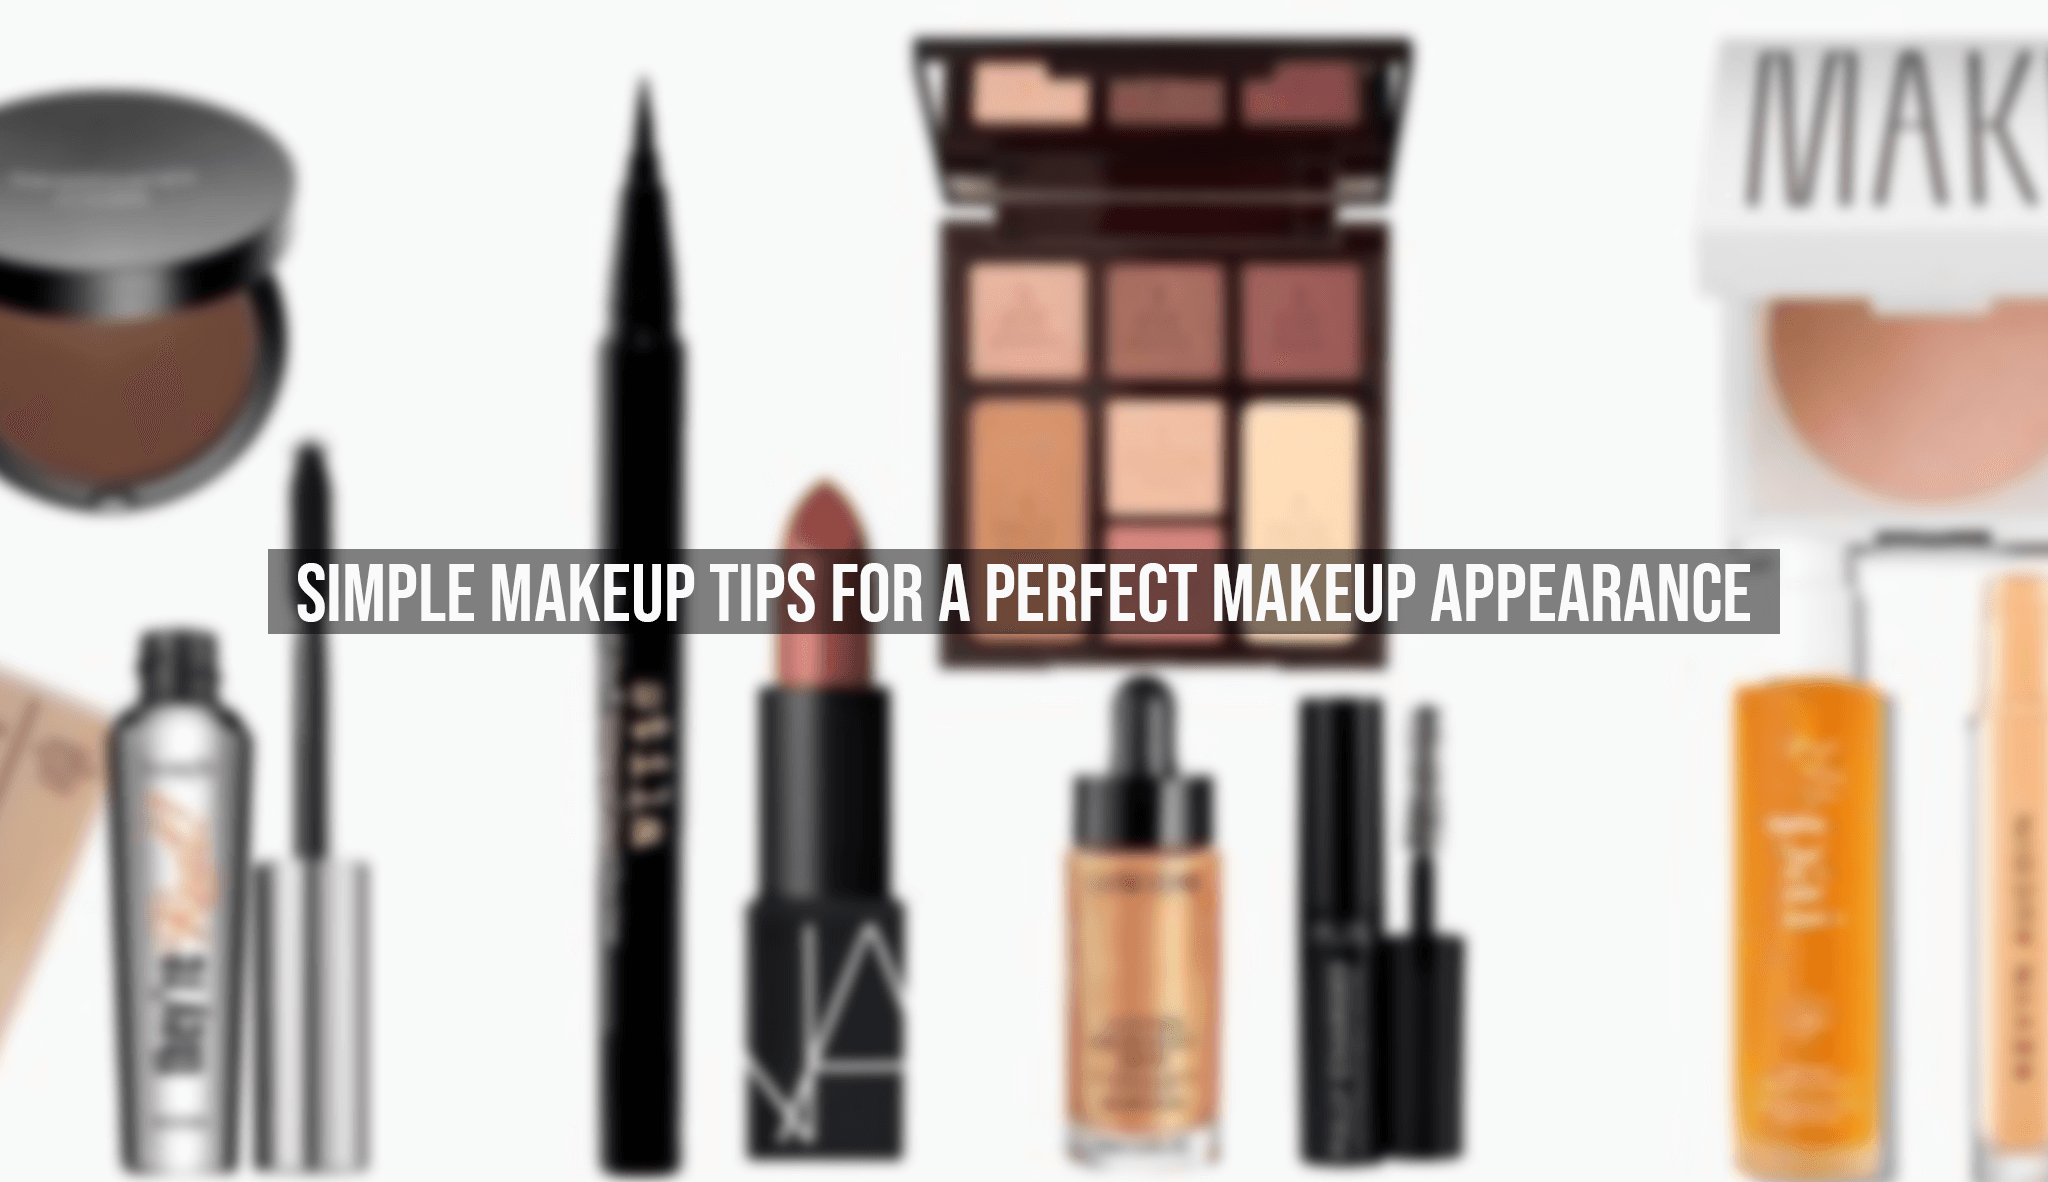 Simple Makeup Tips For a Perfect Makeup Appearance